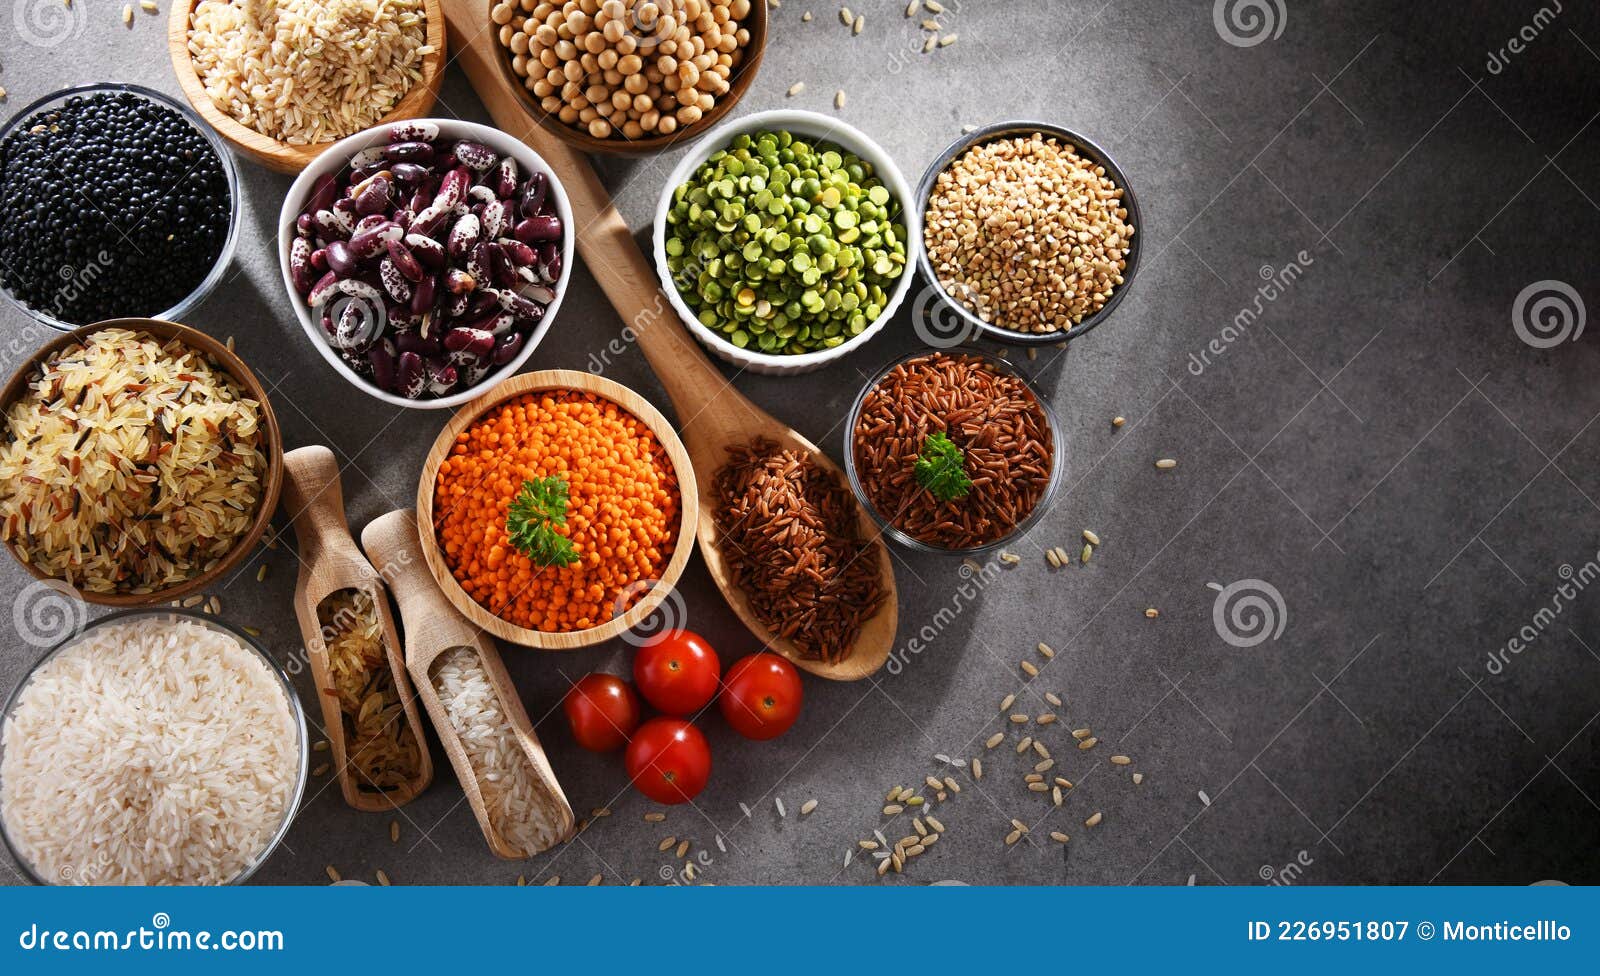 Composition with Different Kinds of Dry Food Products Stock Image ...